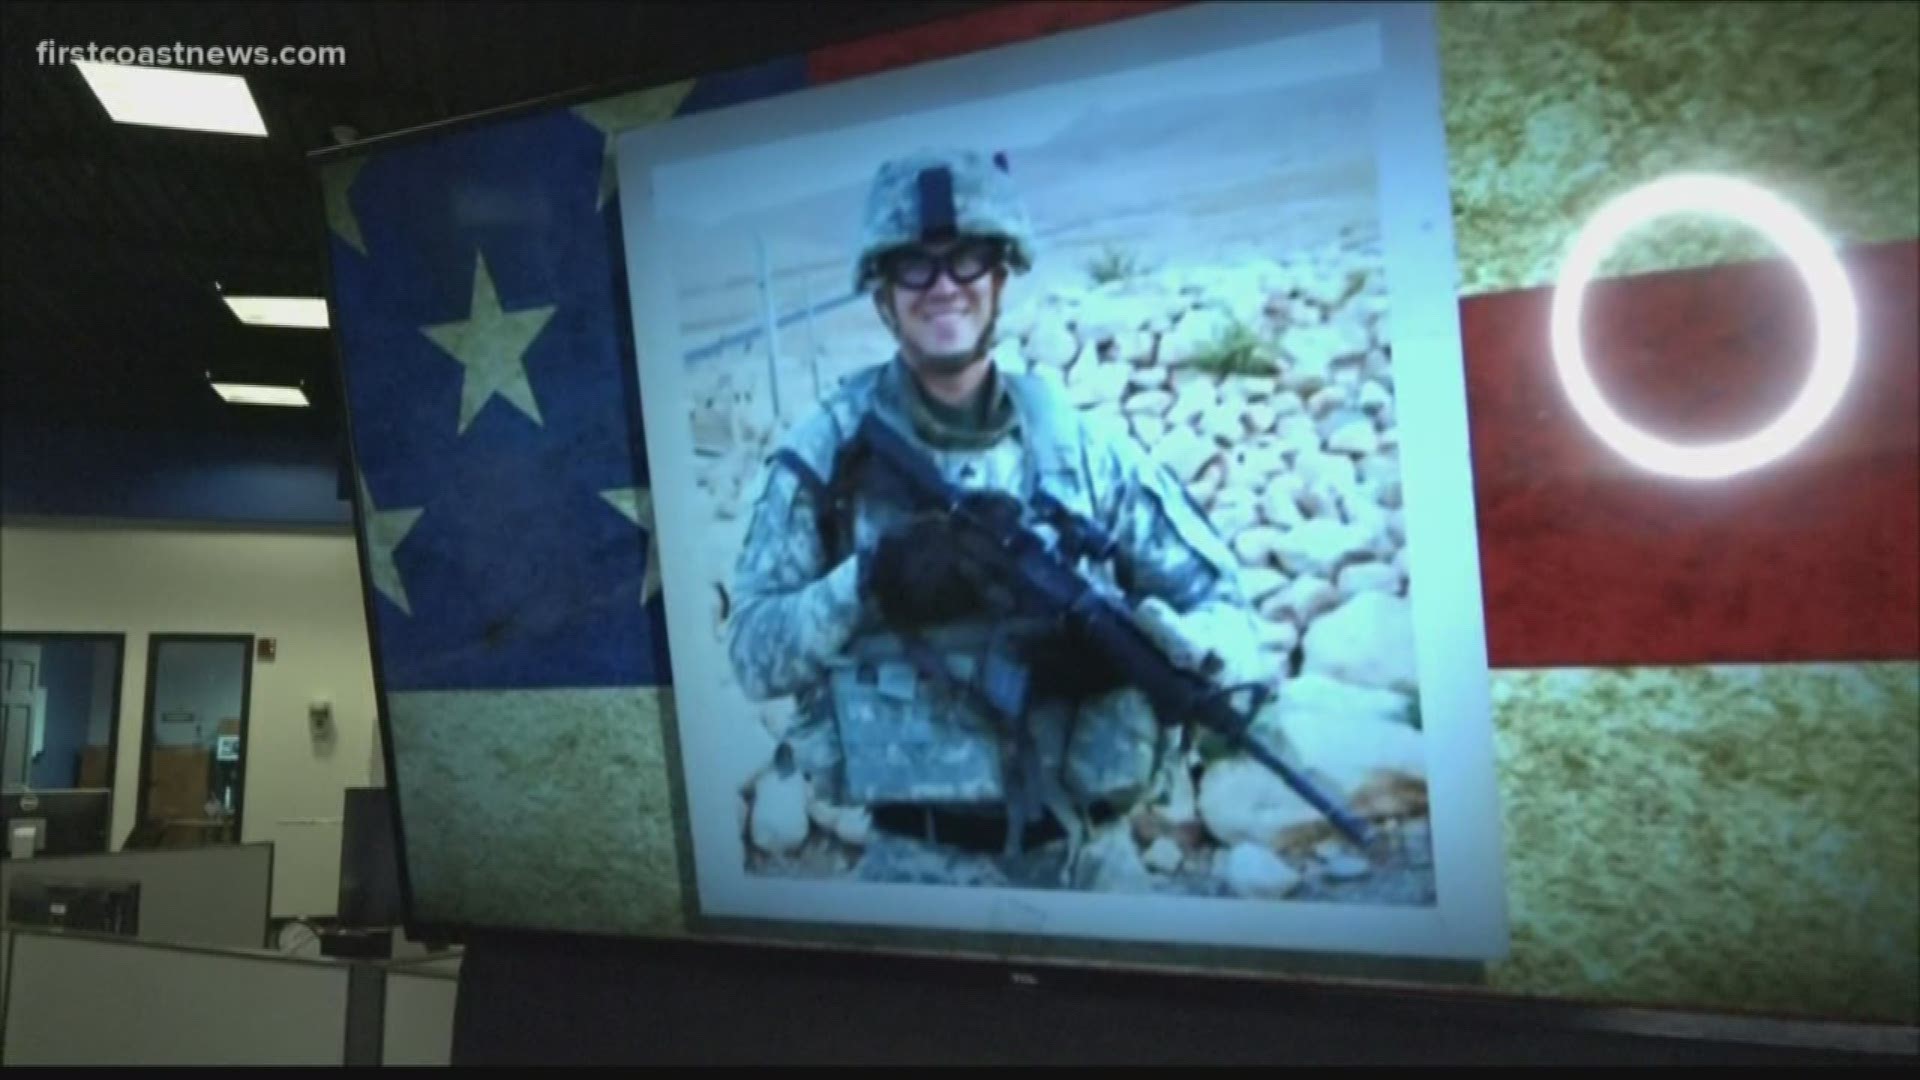 Patrick Zeigler was one of more than 30 people injured in the 2009 mass shooting at Fort Hood in Texas.